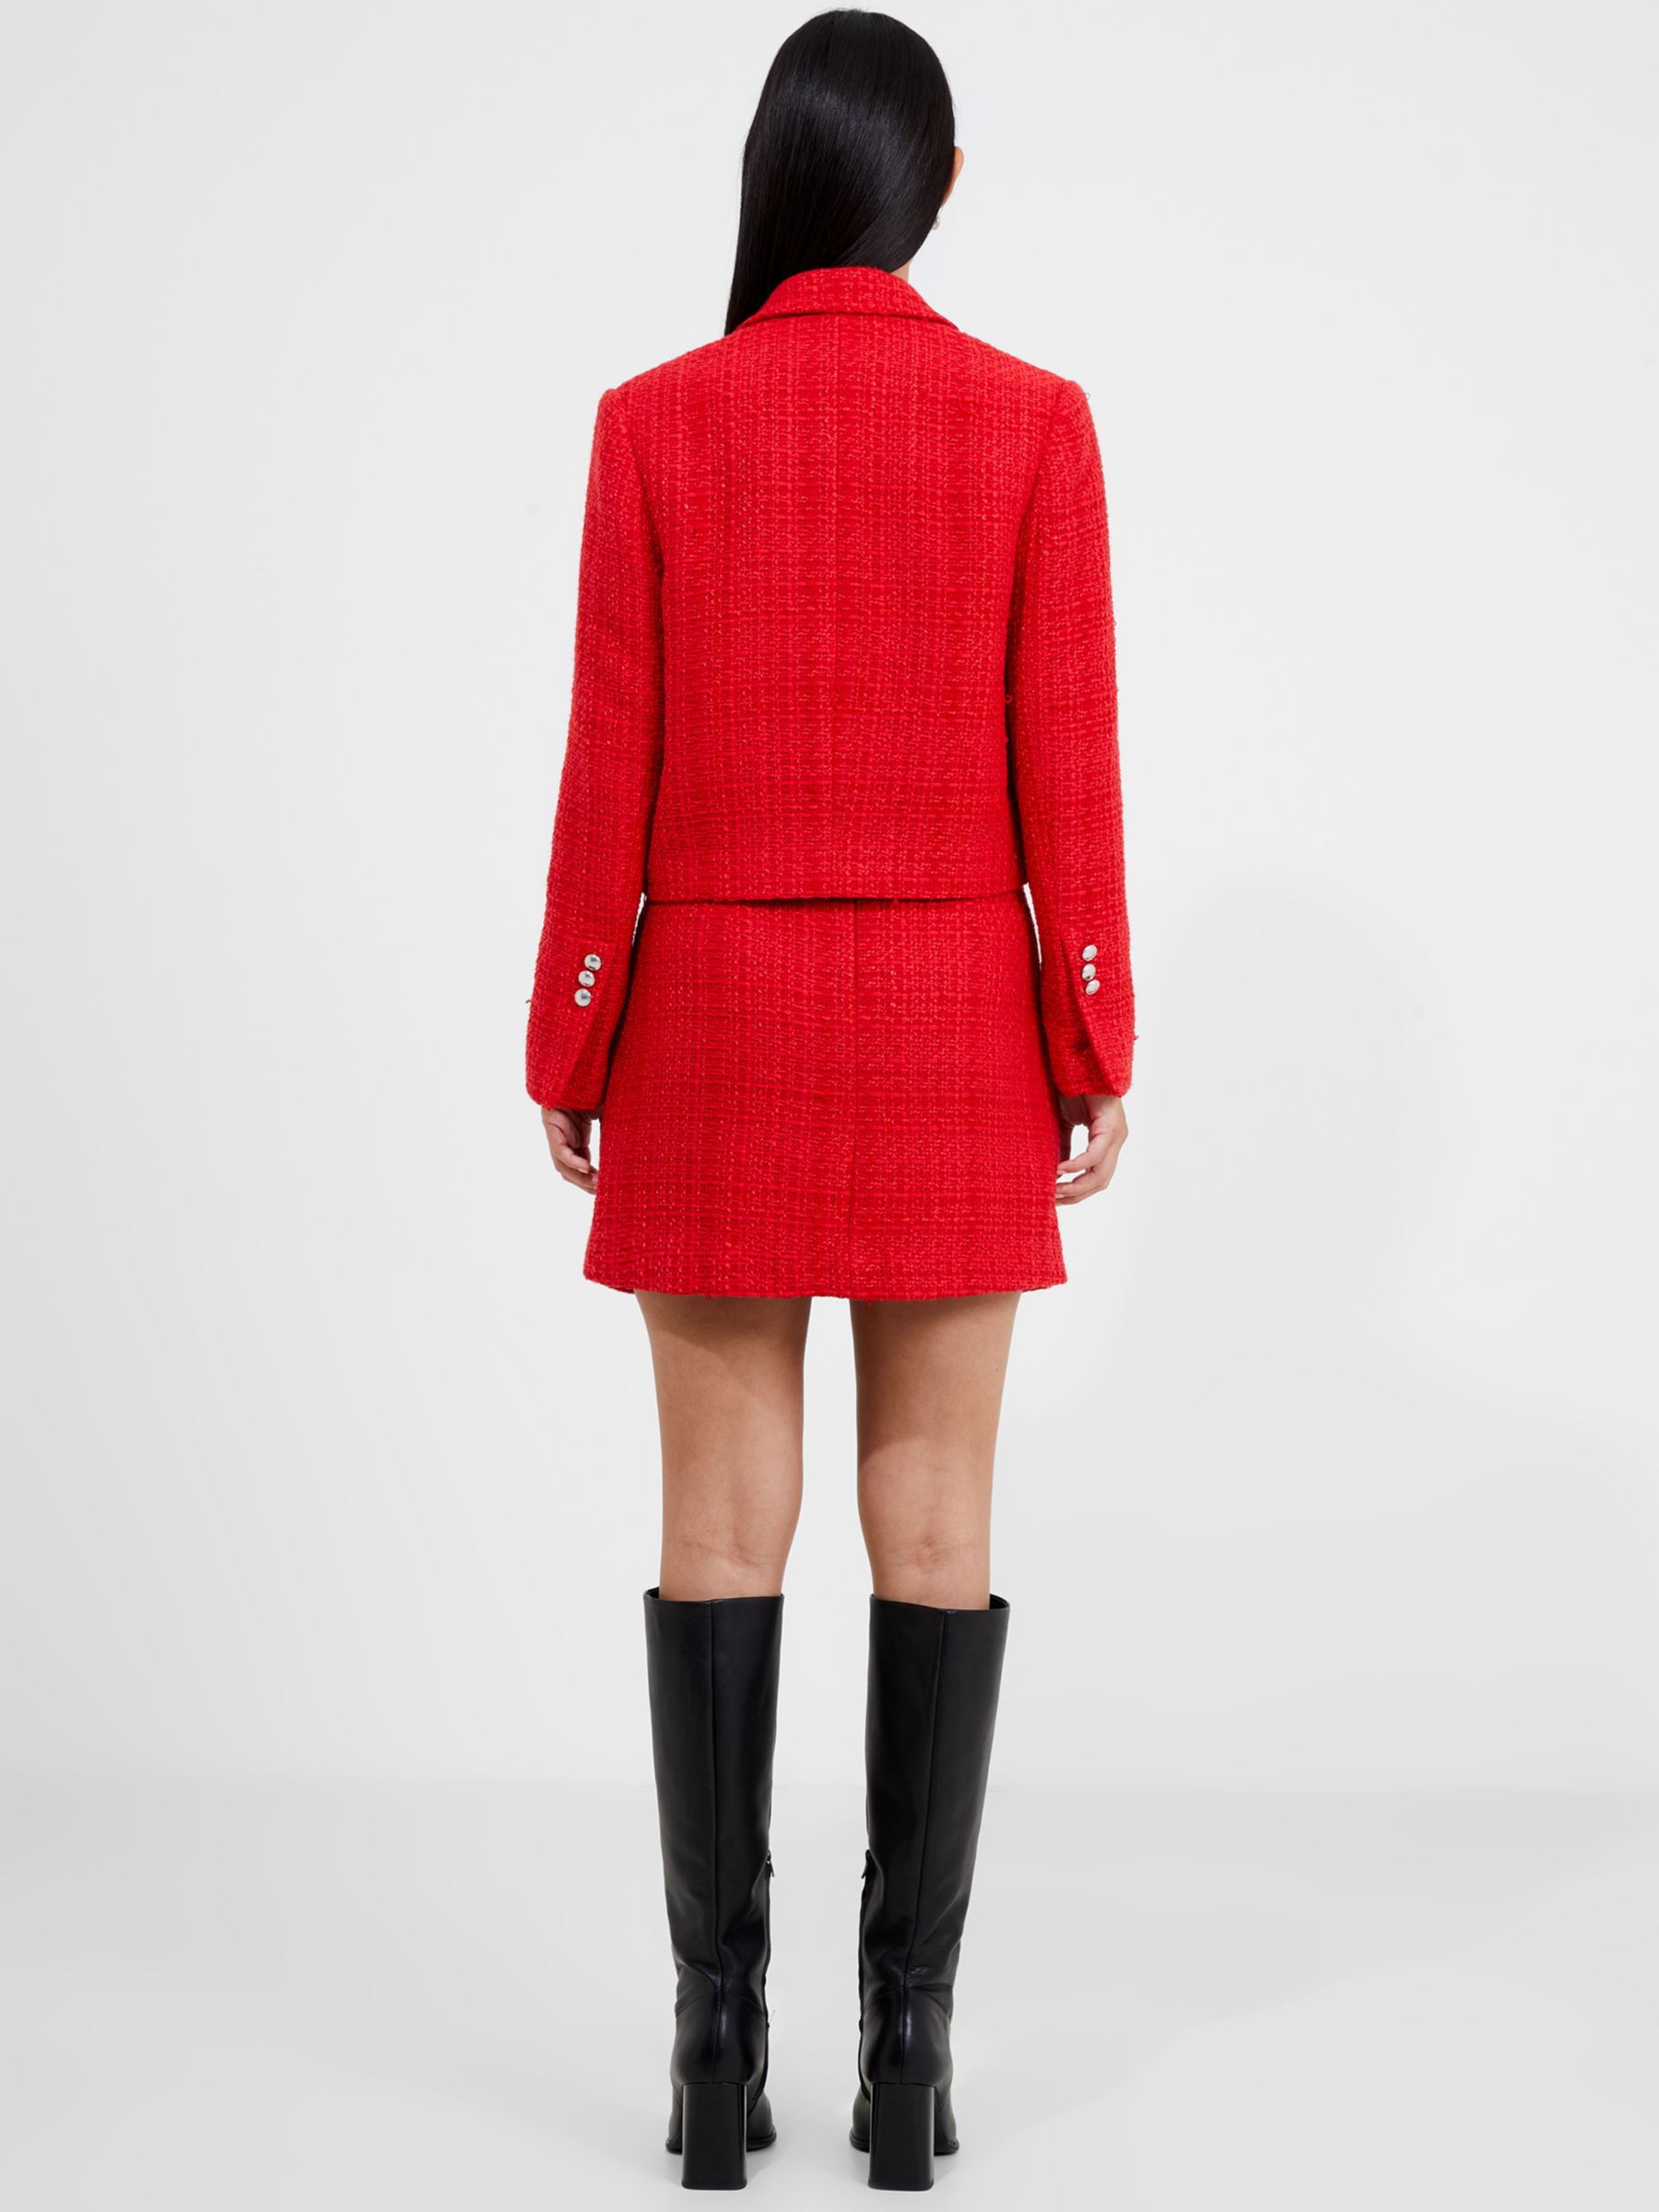 Buy French Connection Azzurra Tweed Mini Skirt, Royal Scarlet Online at johnlewis.com